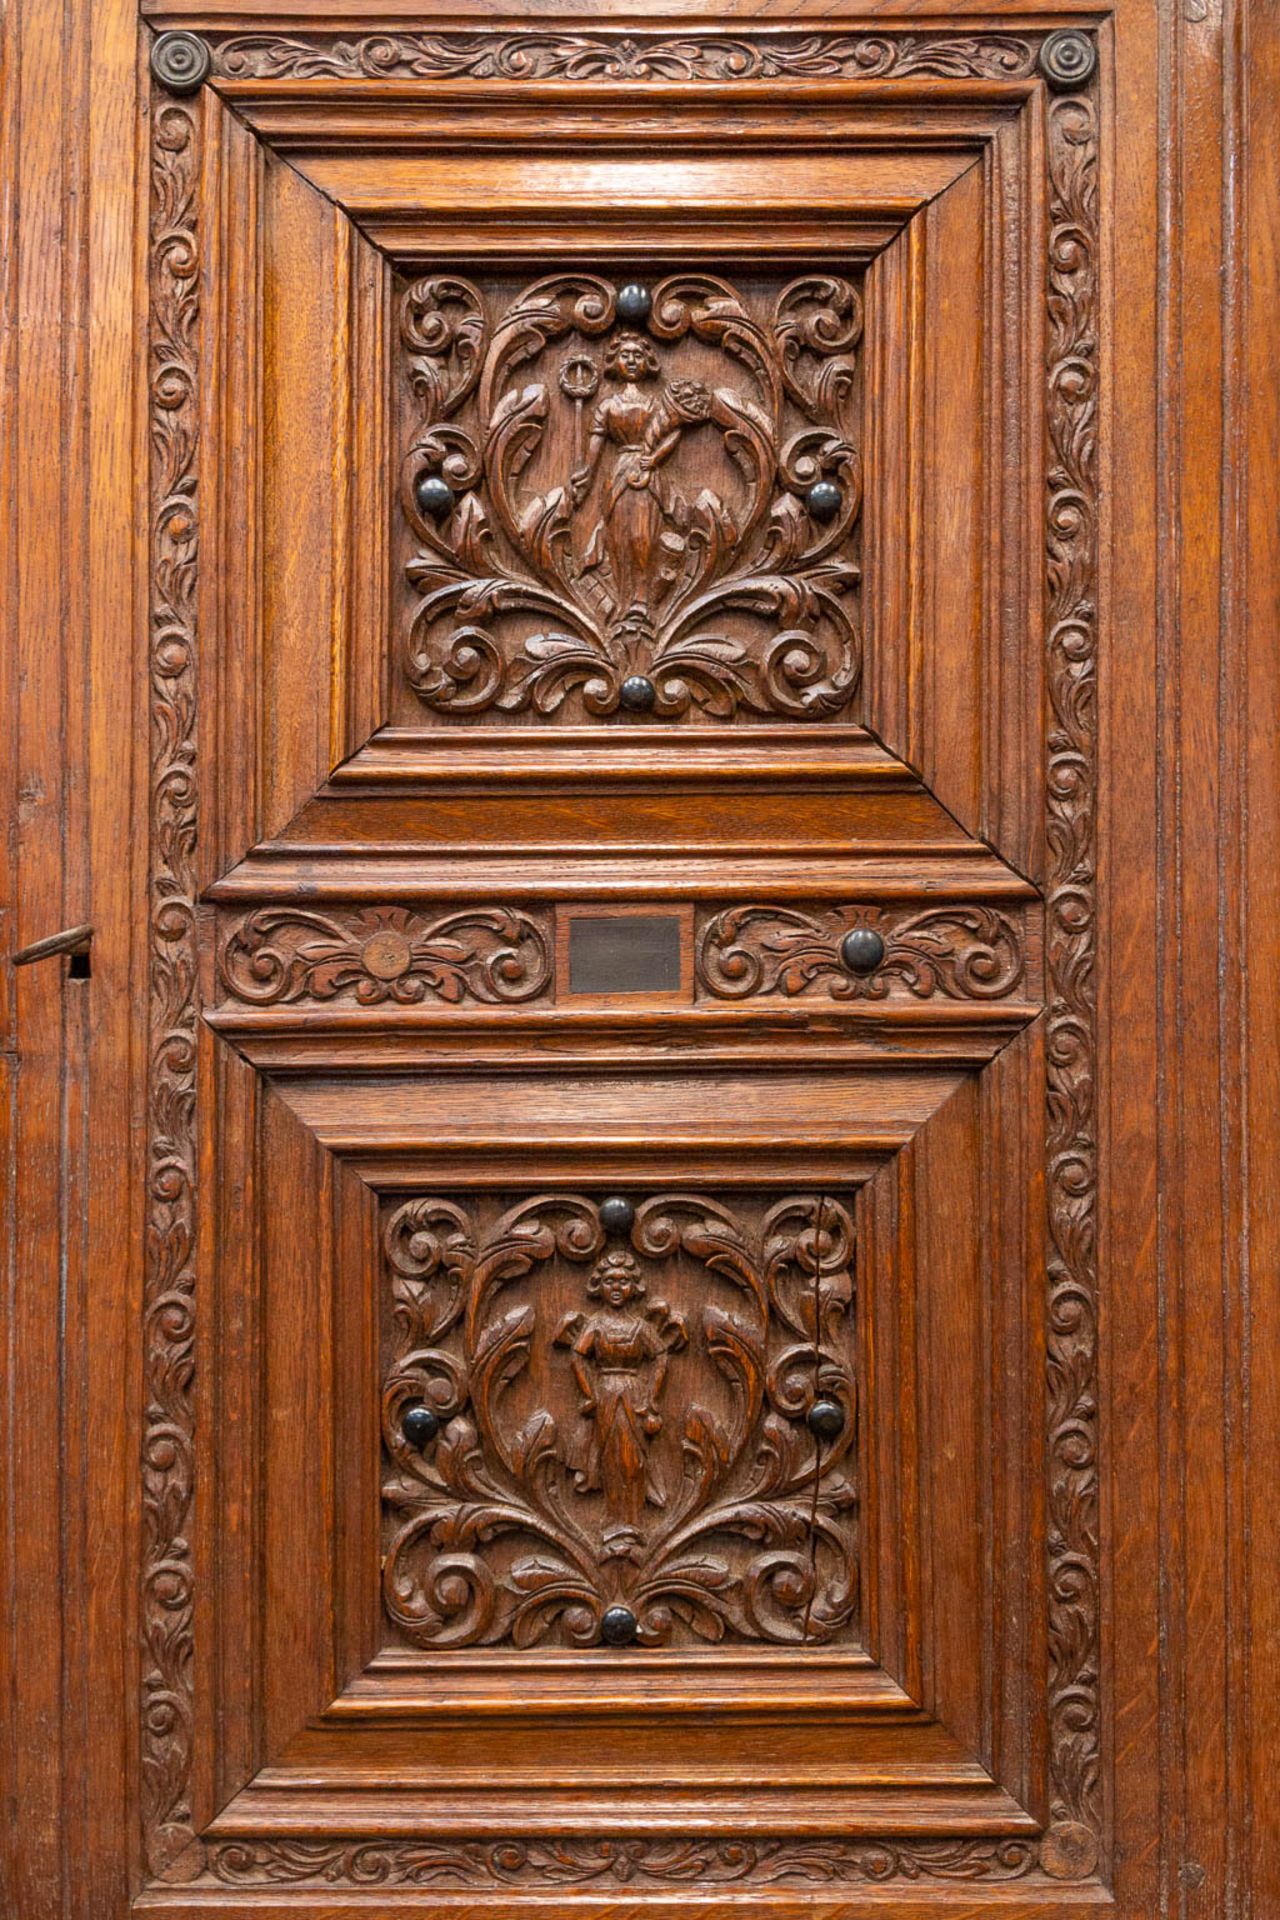 A cabinet, made in Flemish renaissance style, oak with fine sculptures, 19th century. - Image 24 of 27